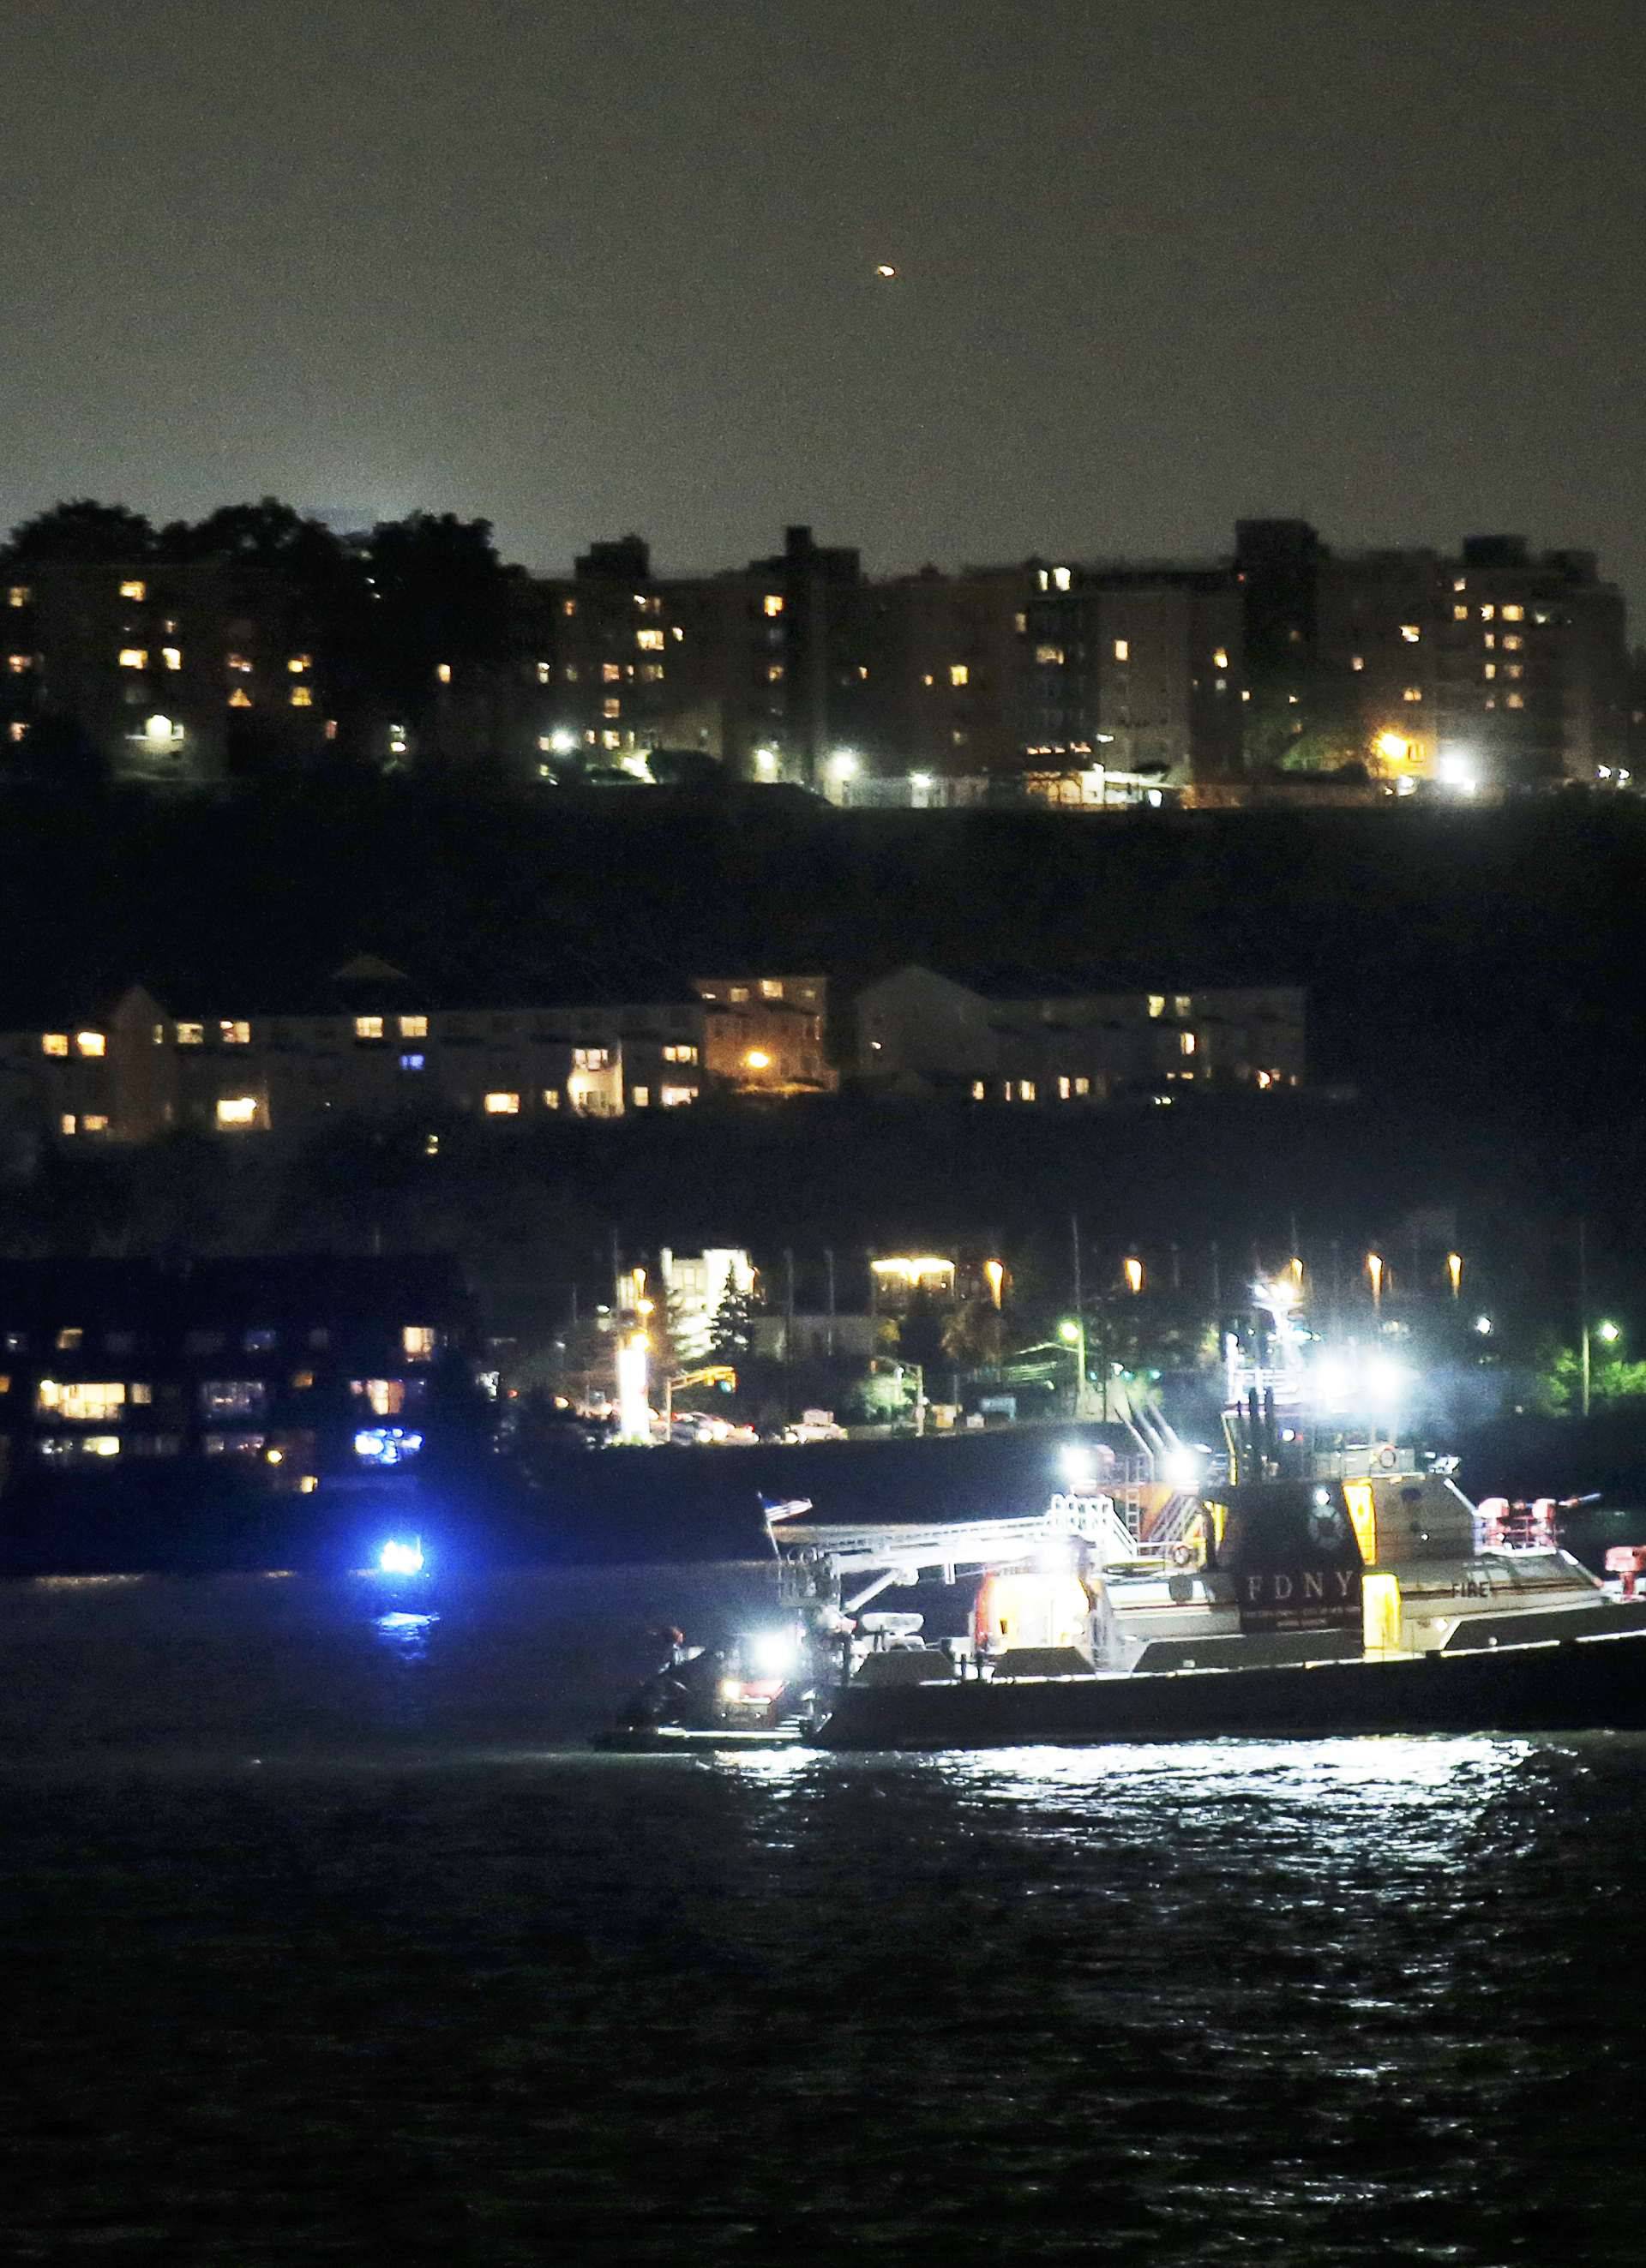 An FDNY fire department boat searches the Hudson River for the wreckage of a vintage P-47 Thunderbolt airplane that crashed in the river in New York City